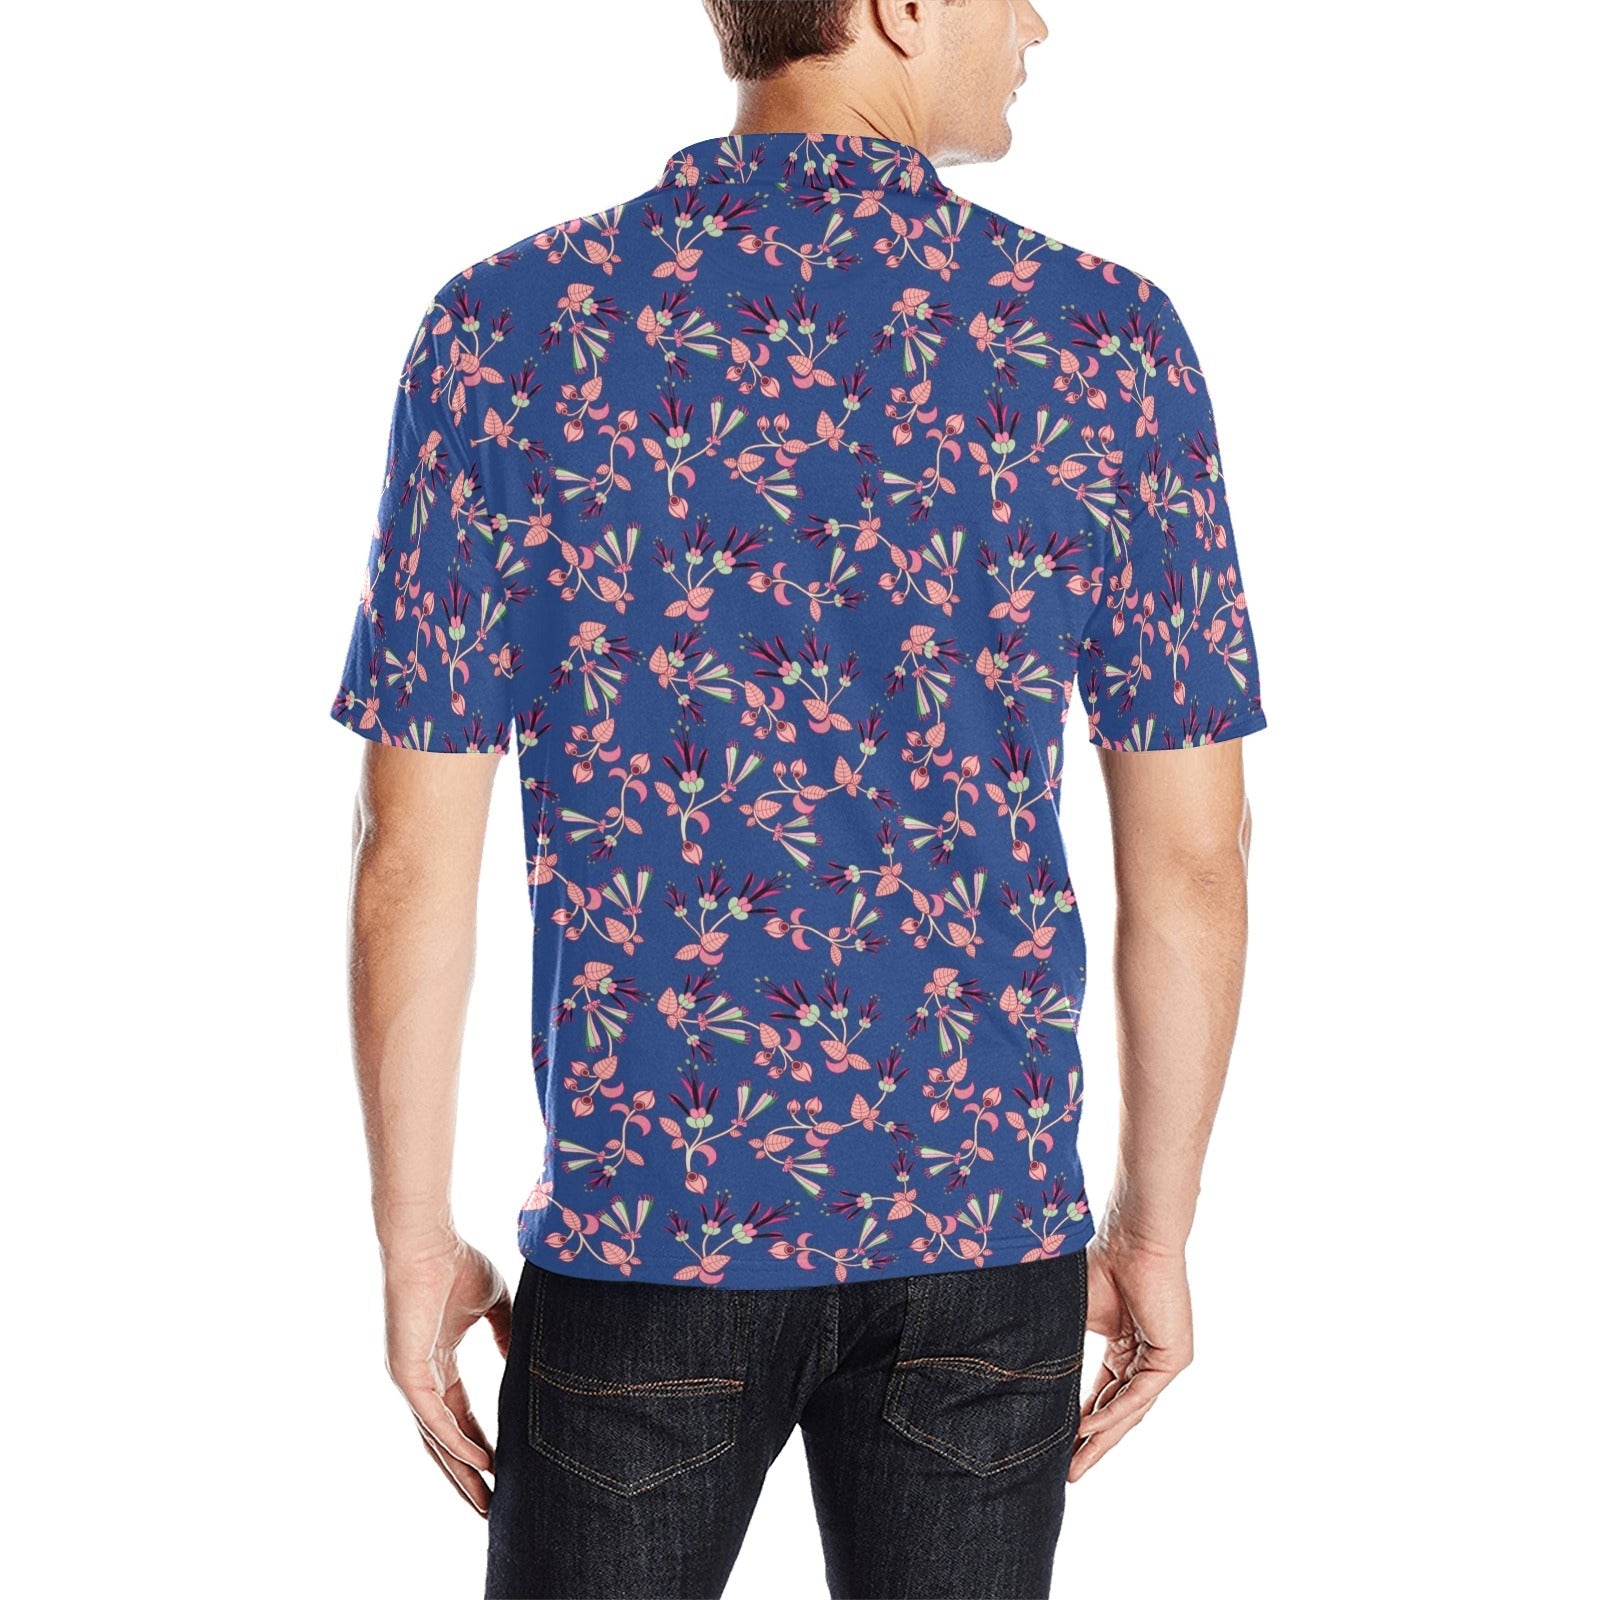 Swift Floral Peach Blue Men's All Over Print Polo Shirt (Model T55) Men's Polo Shirt (Model T55) e-joyer 